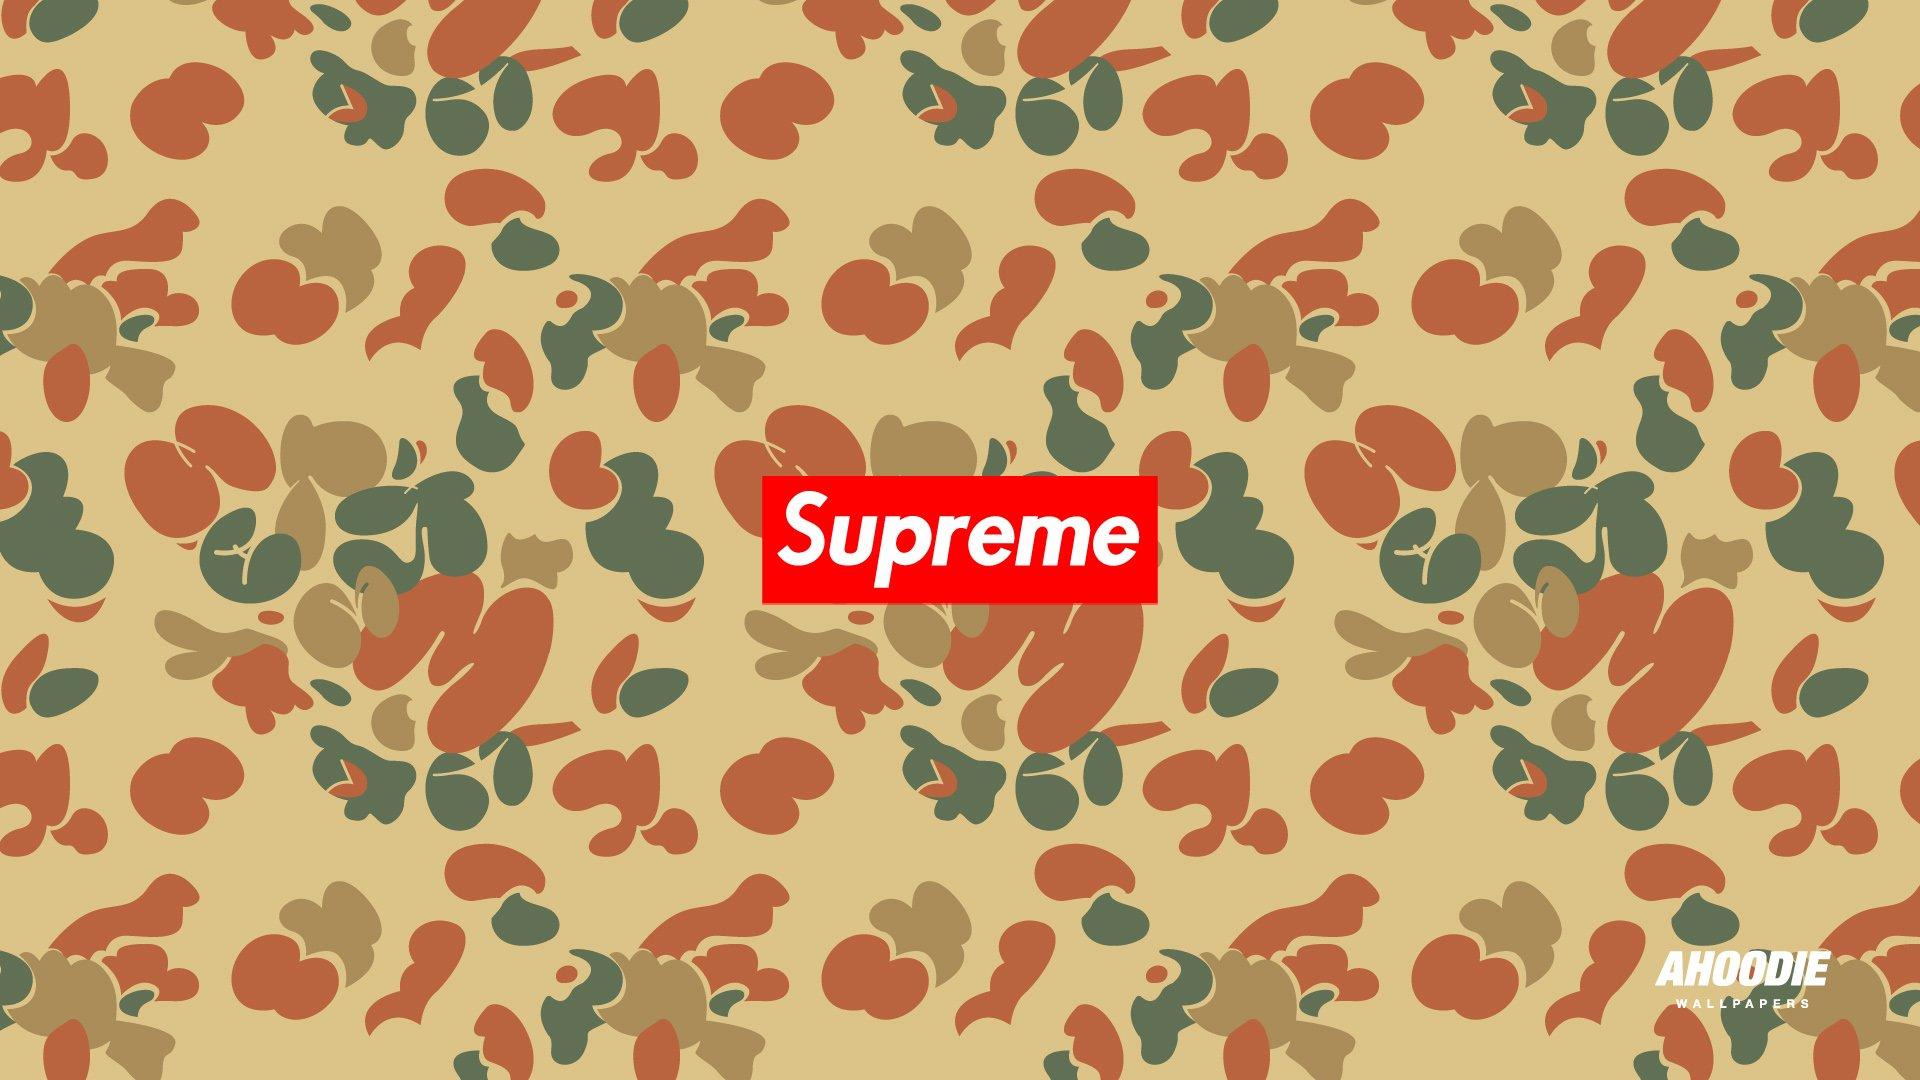 Supreme Image and Wallpaper for Mac, PC